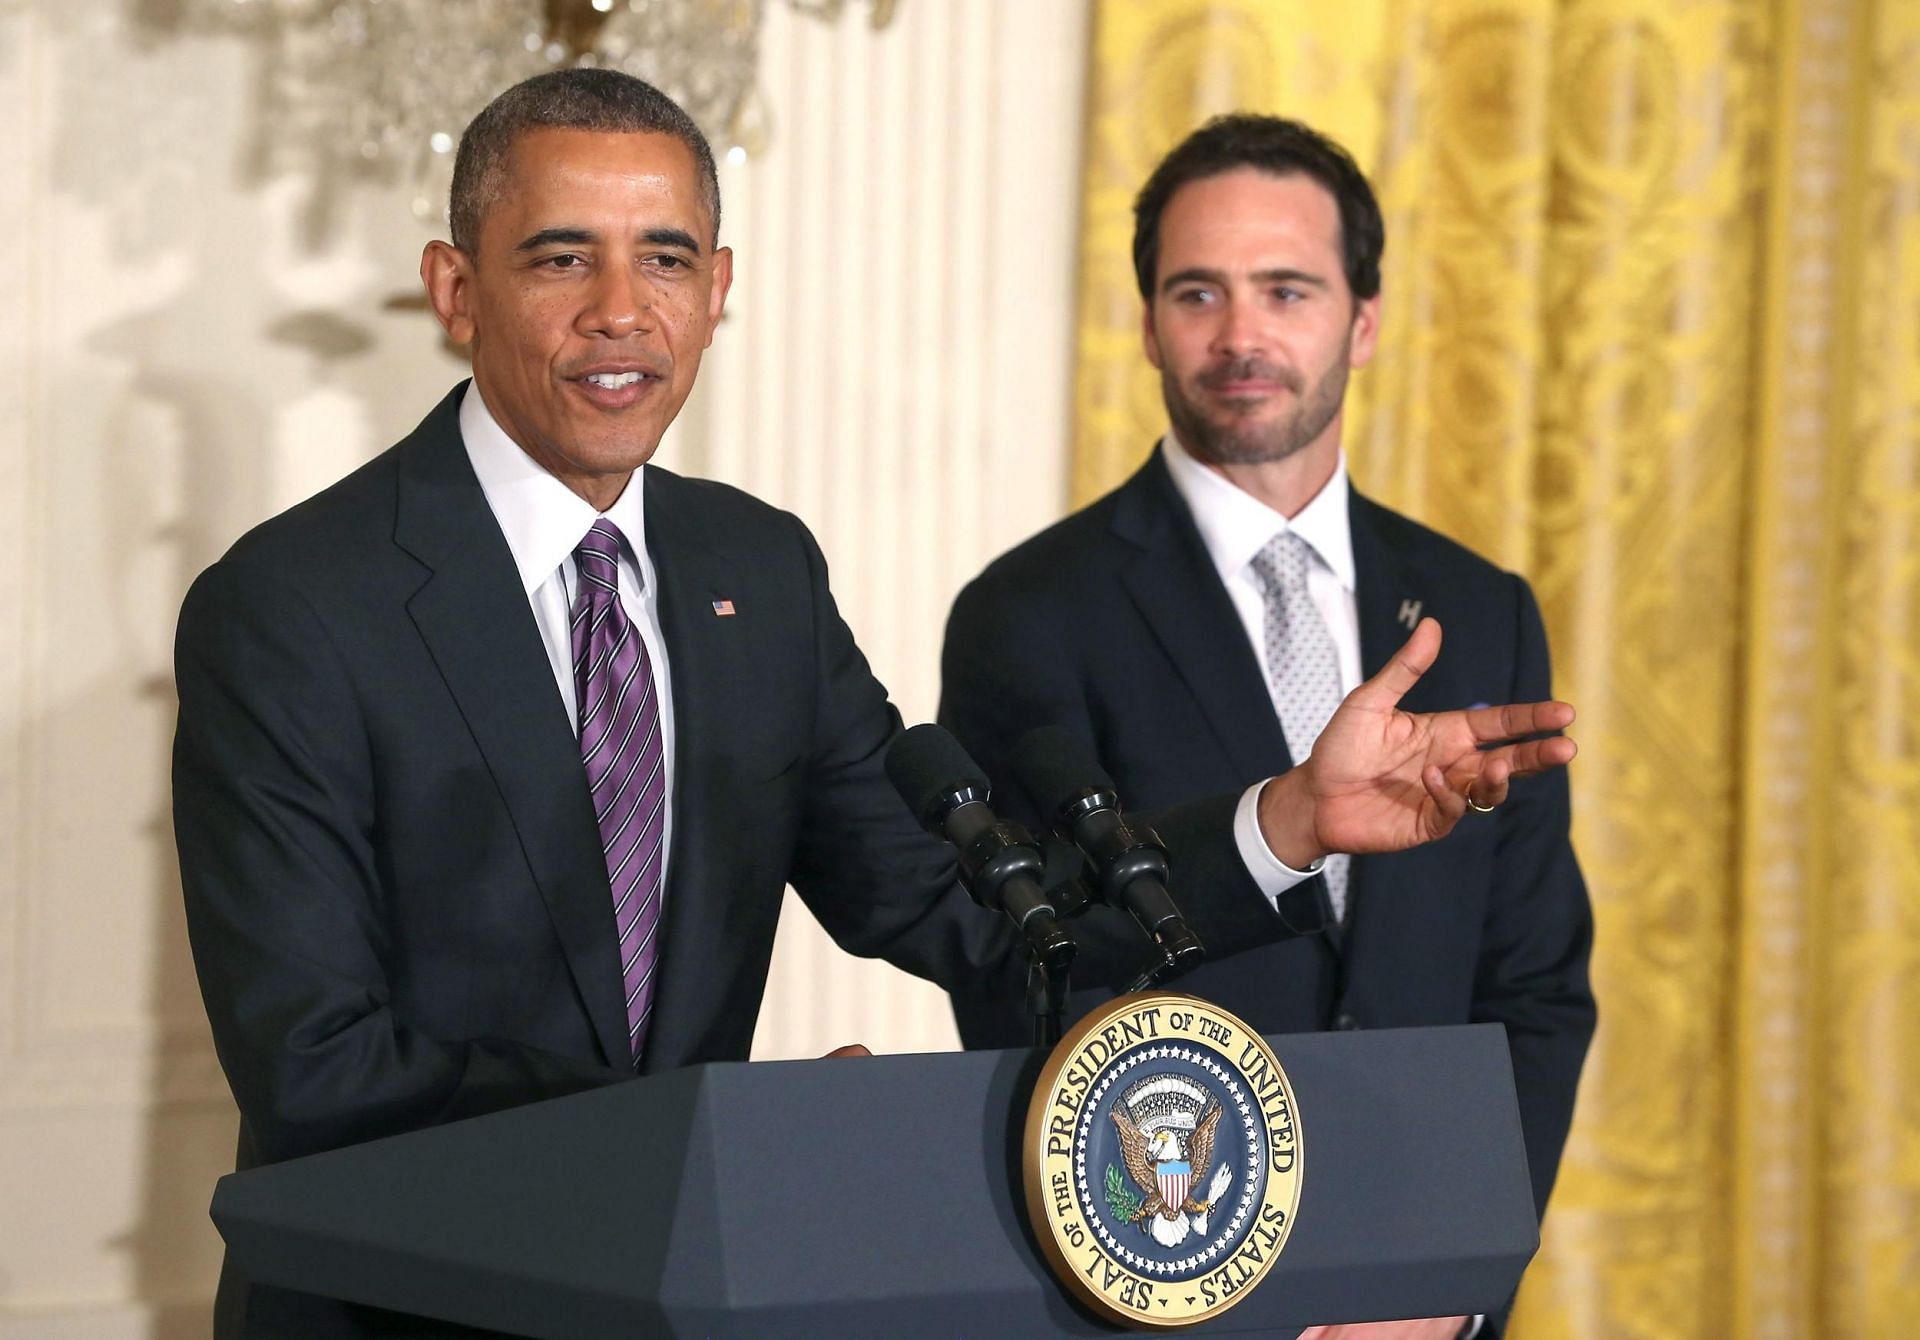 Barack Obama and Jimmie Johnson at the White House in 2014(Image credit NBC NEWS)